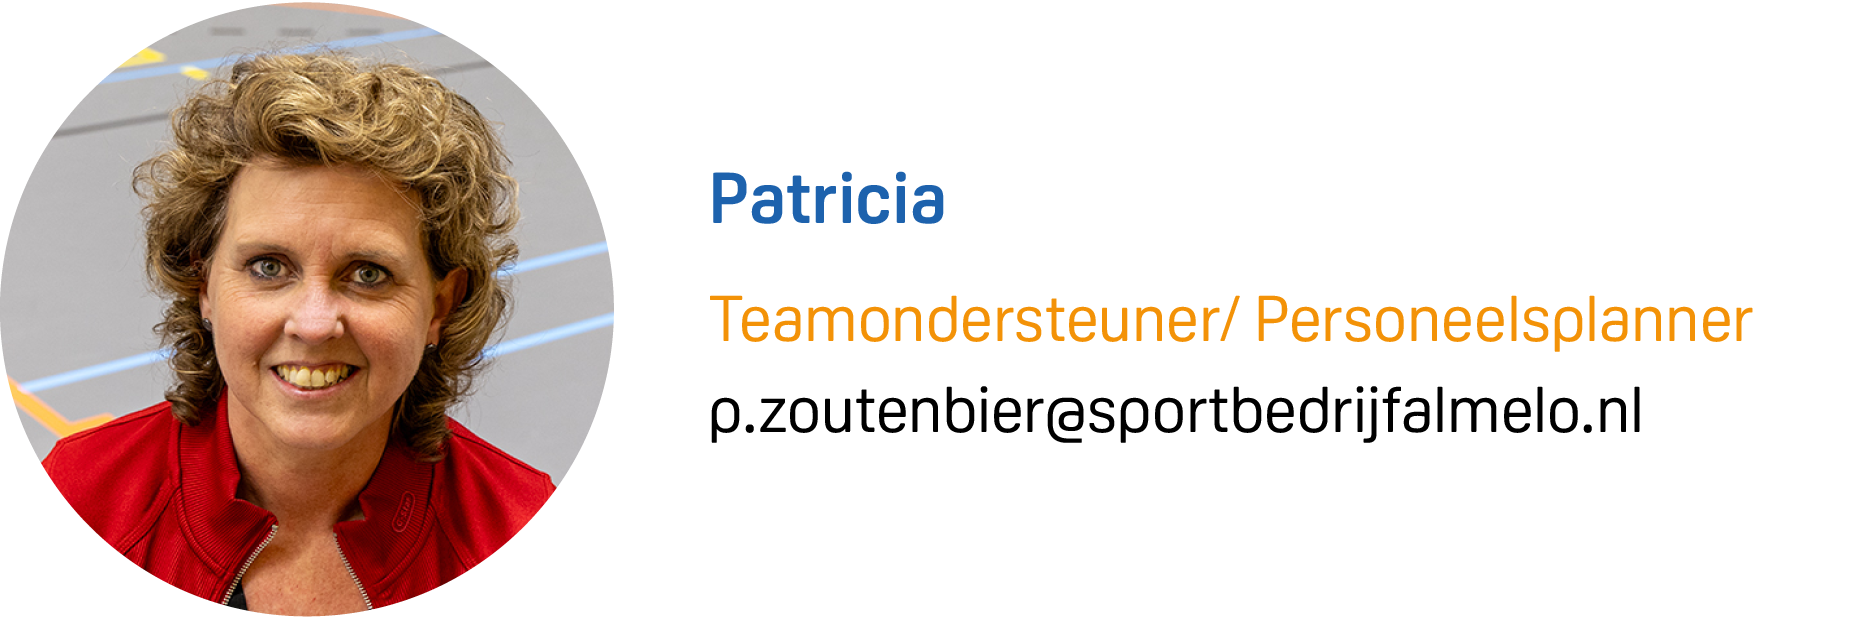 Patricia Visite MAIL.png